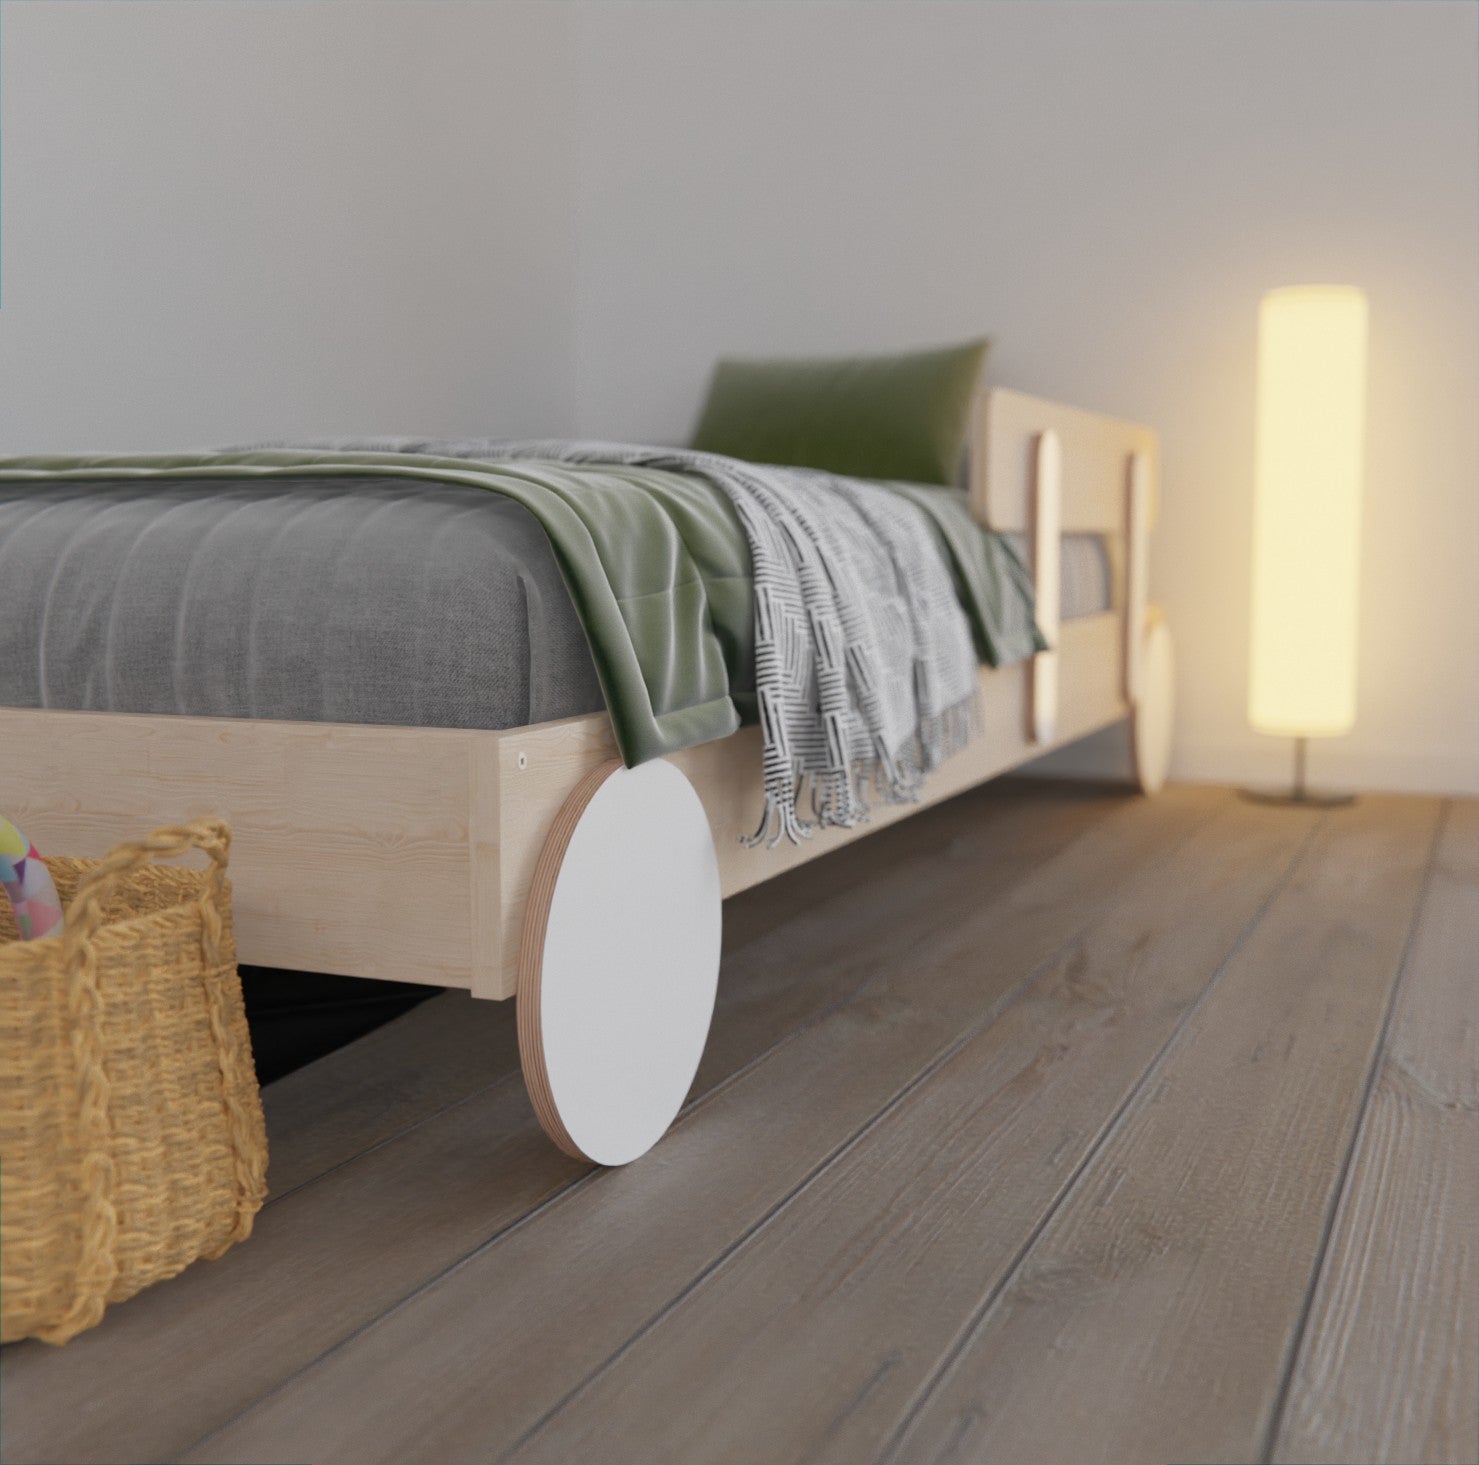 Montessori floor bed frame: Safe, NZ Made product for toddlers. Upgrade your kids' bedroom now!